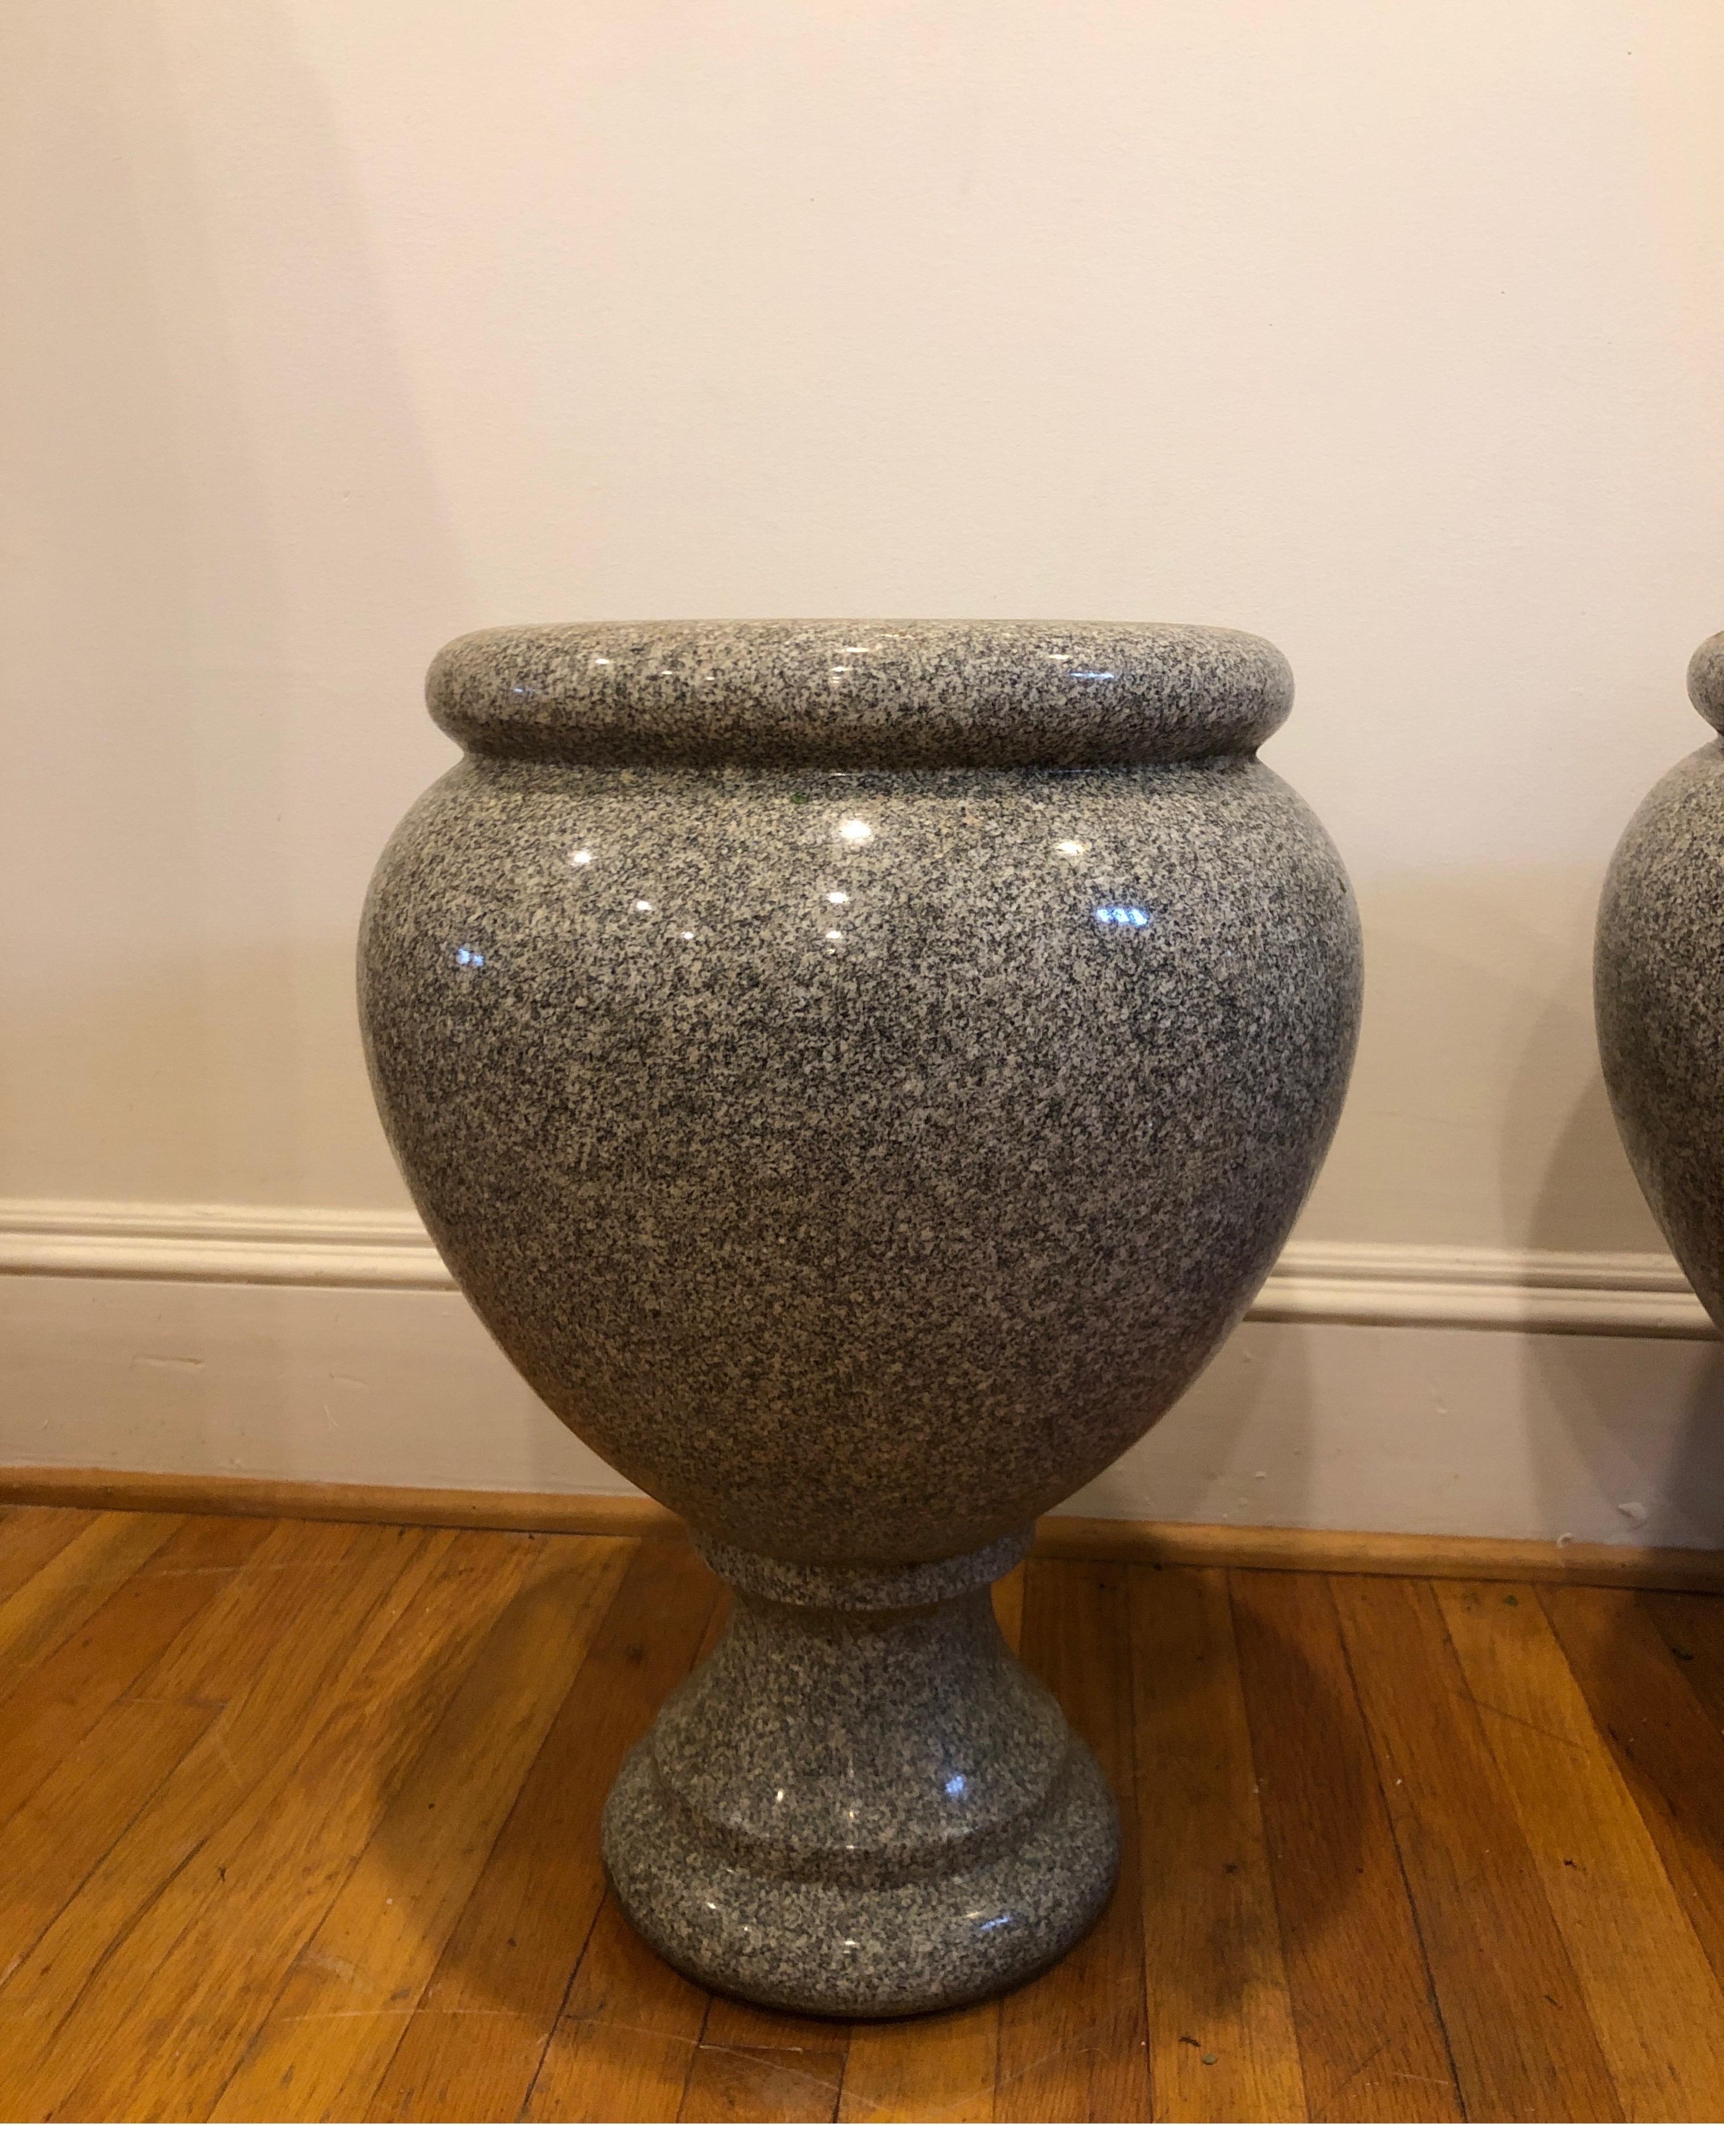 Gorgeous pair of large scale granite urns. Measure approximate 21.5 height x 16 width x 16 depth.
Almost 10 inch opening at top.
Have been used as planters.

The body has Classic elegant shape with rim around the edge. 
Mix of grays, creams and